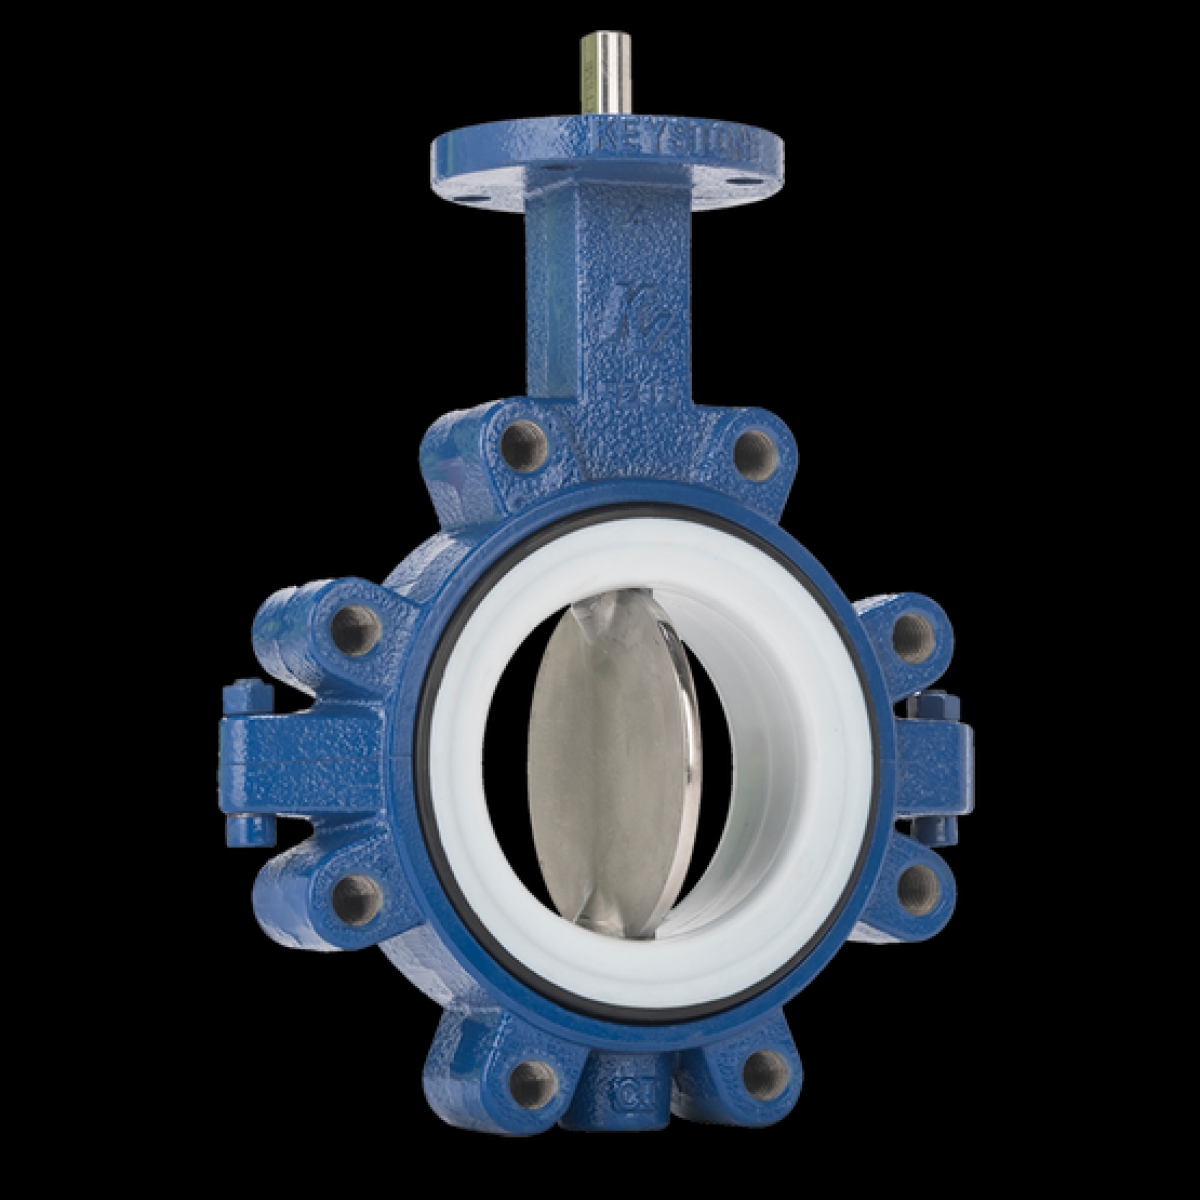 The Emerson Keystone Figure 990/920 Resilient Seated Butterfly Valve